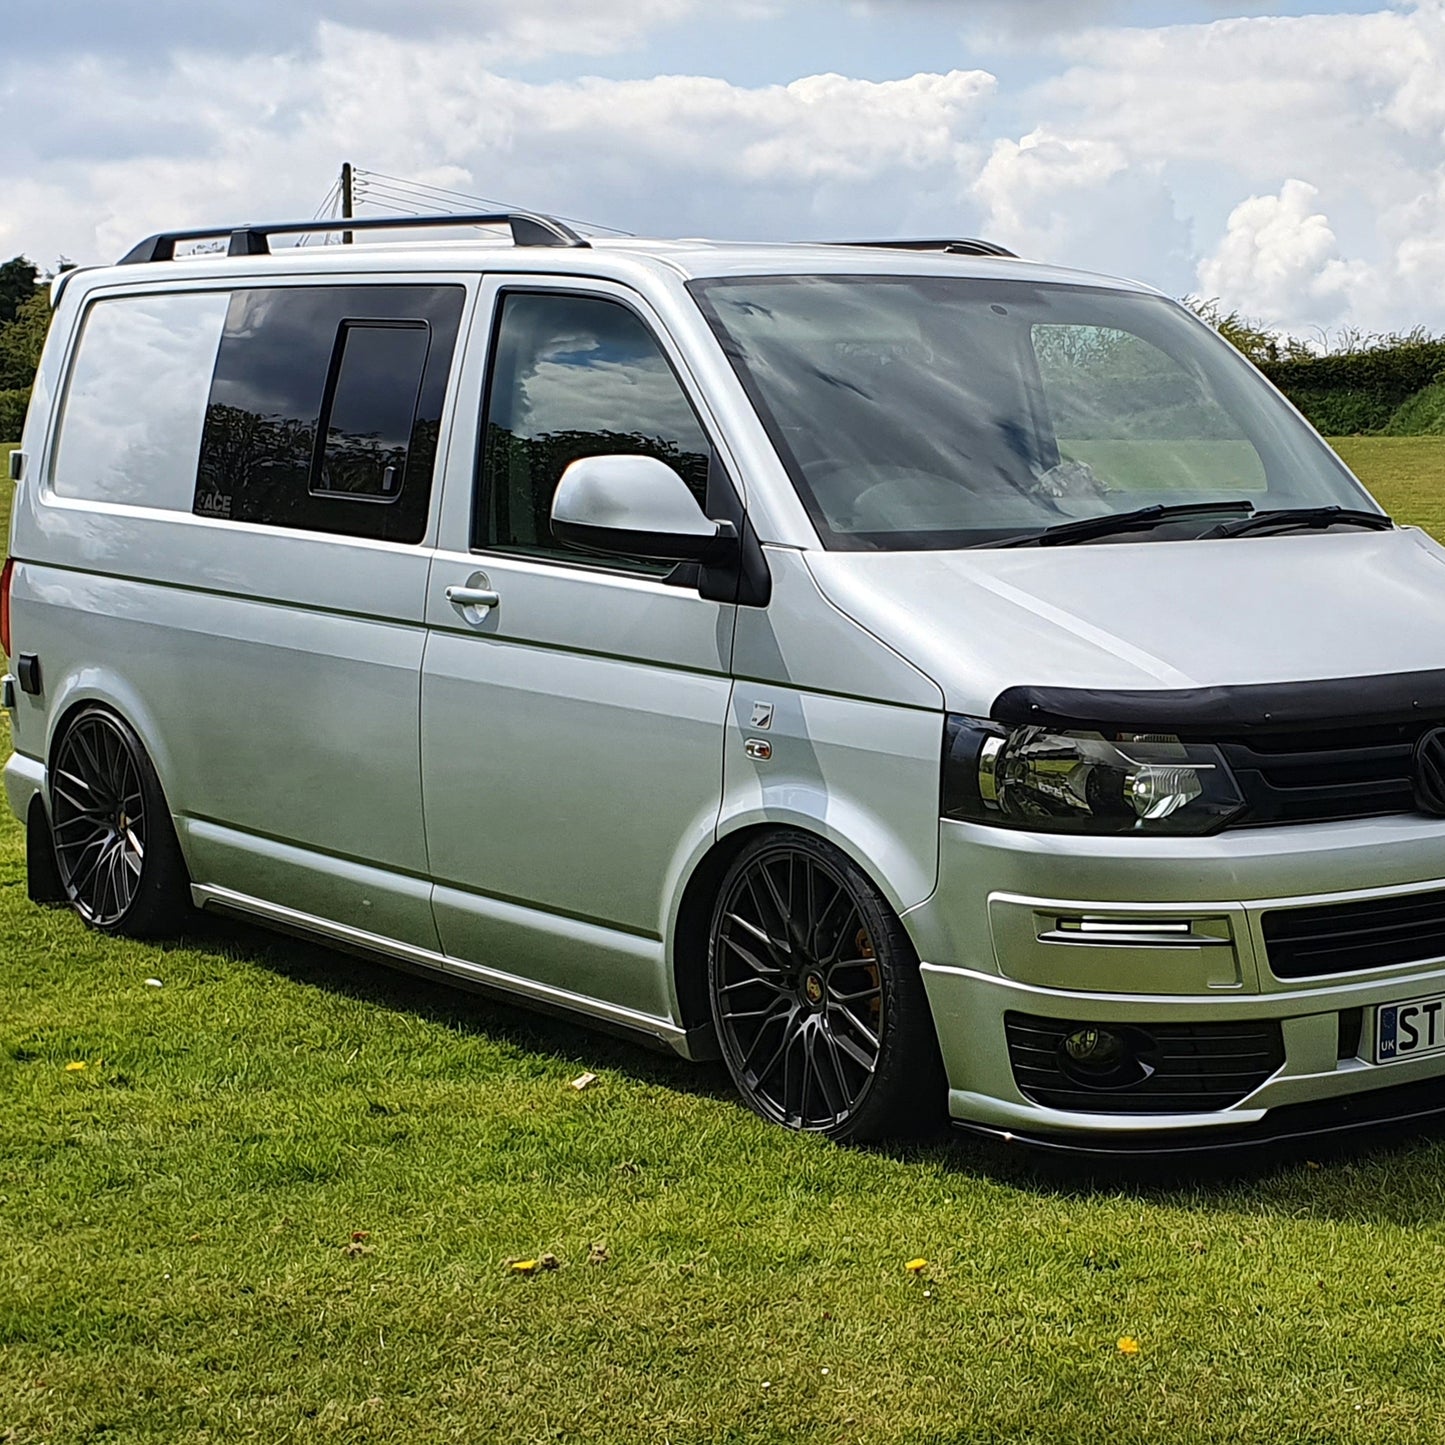 VOLKSWAGEN T5 SIDE SKIRTS – S-tuning